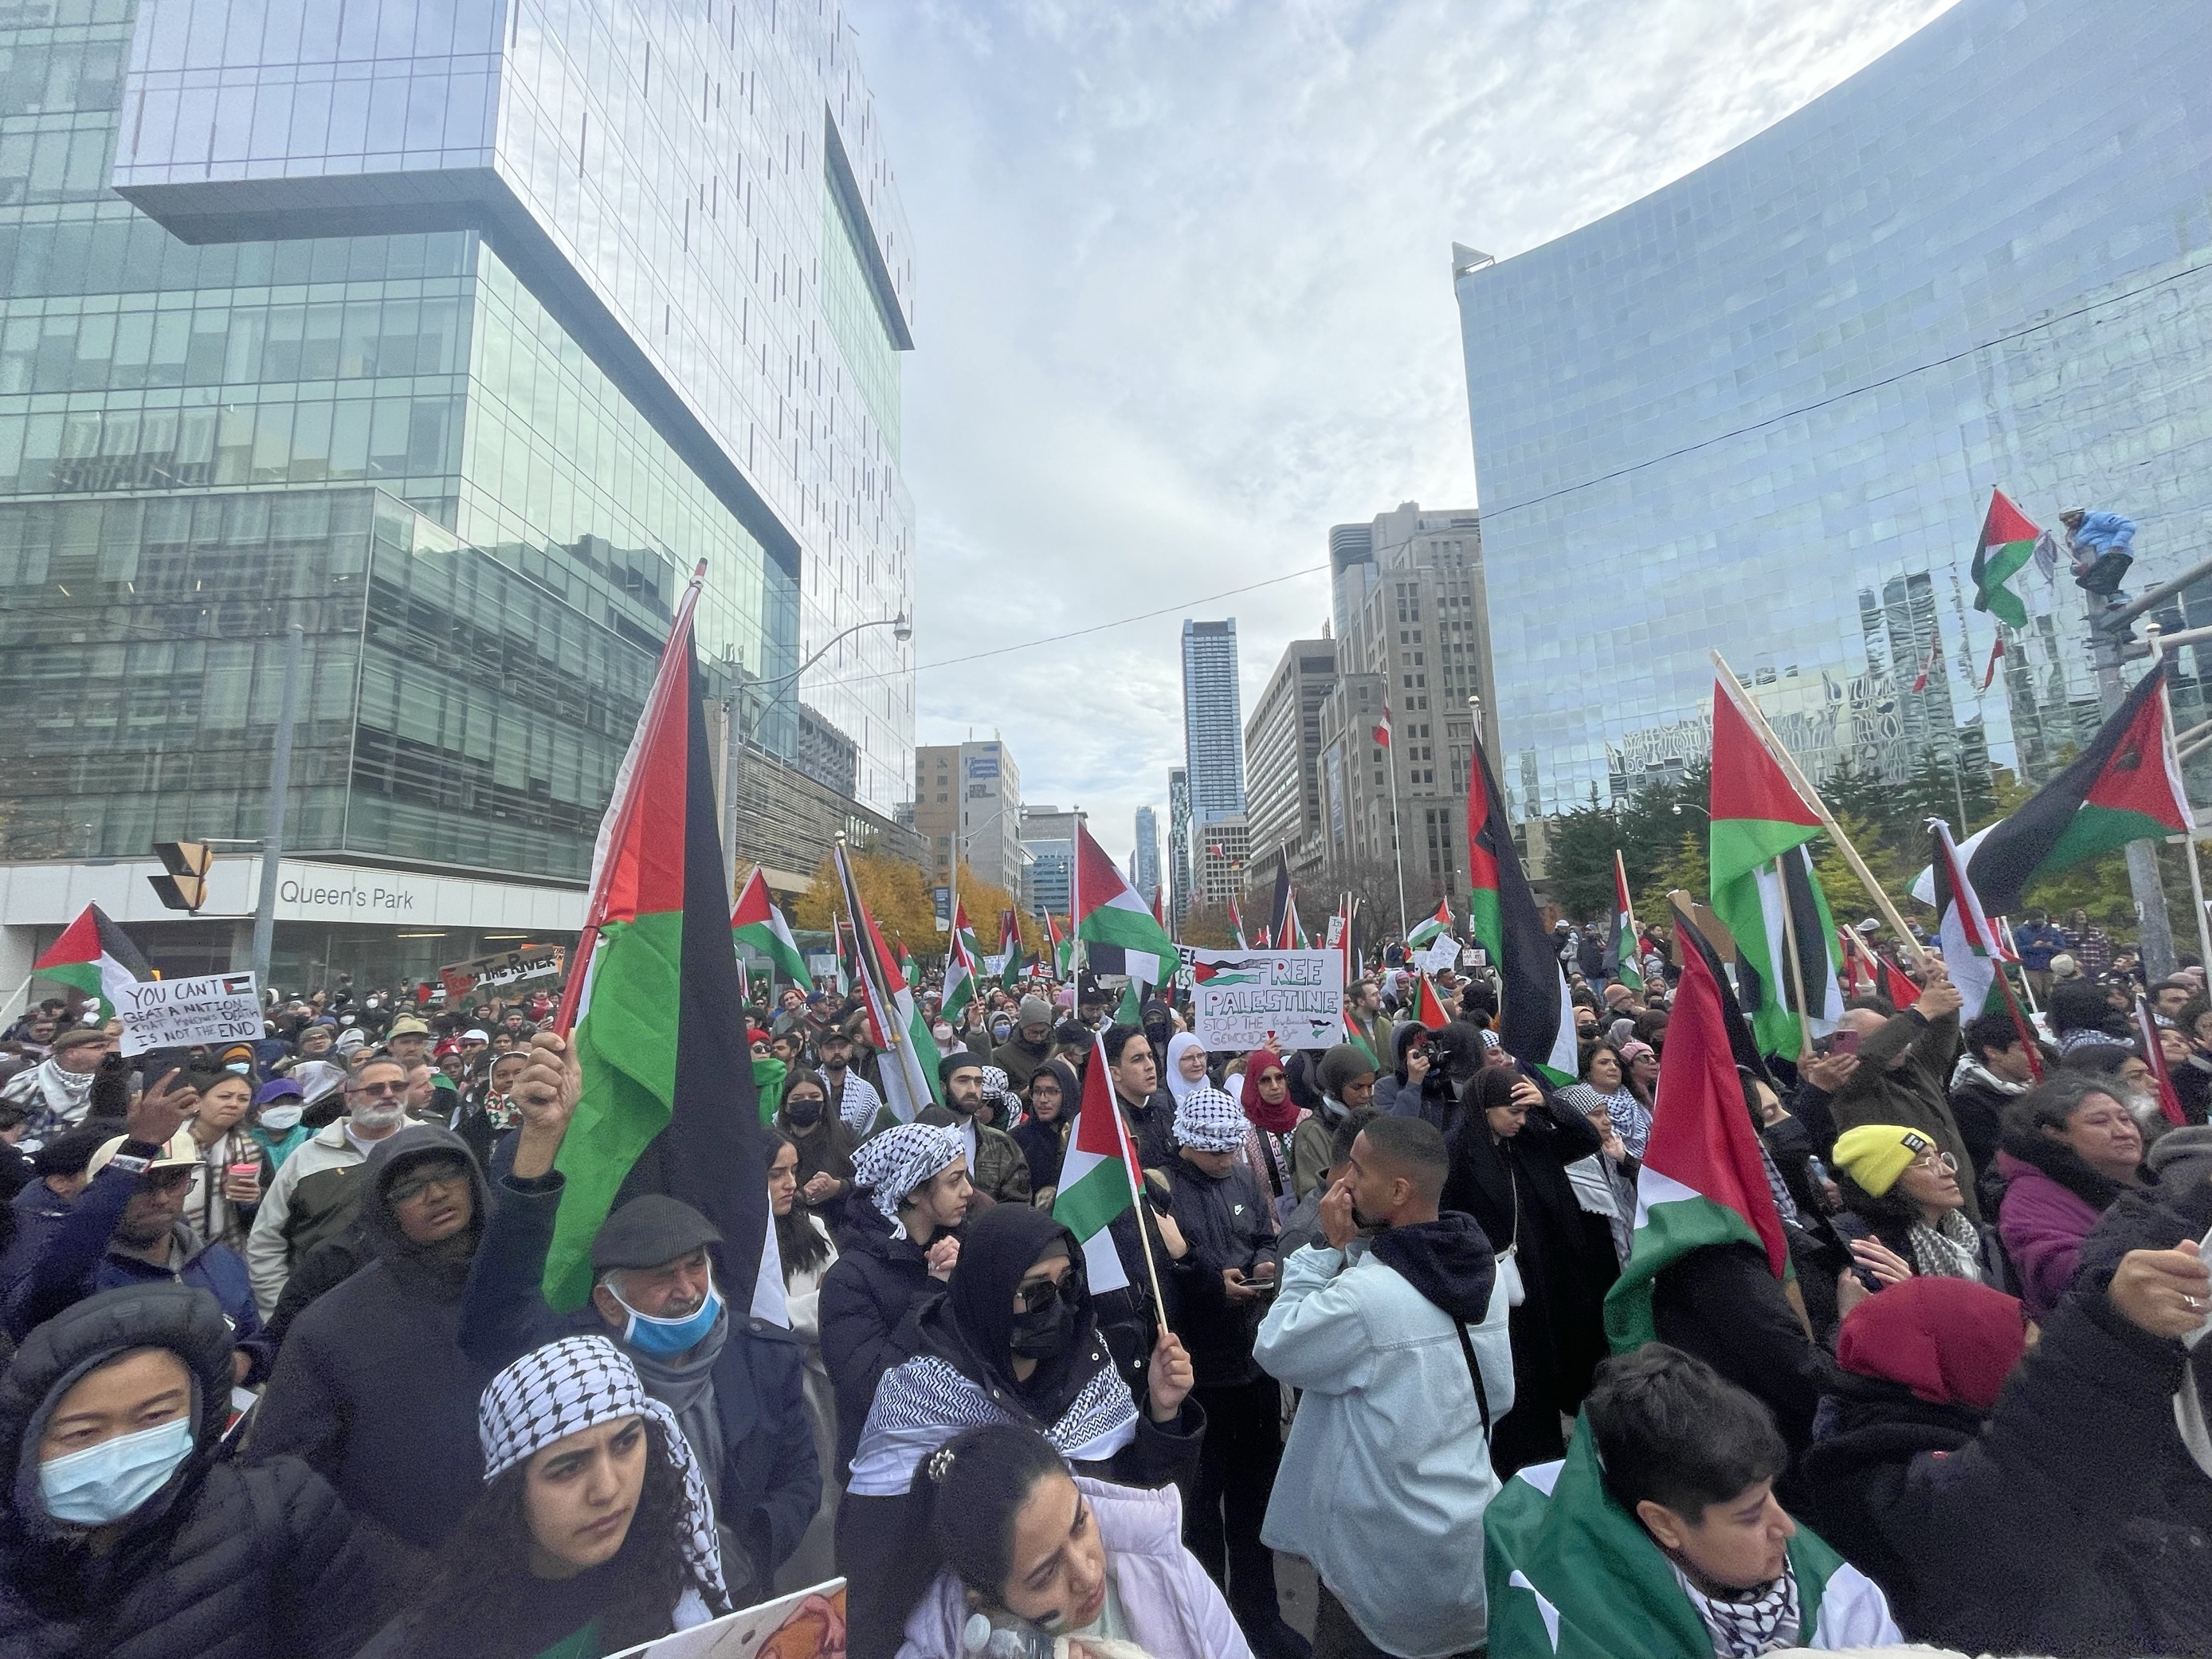 Large Israeli, Palestinian events held in Toronto amid Middle East violence